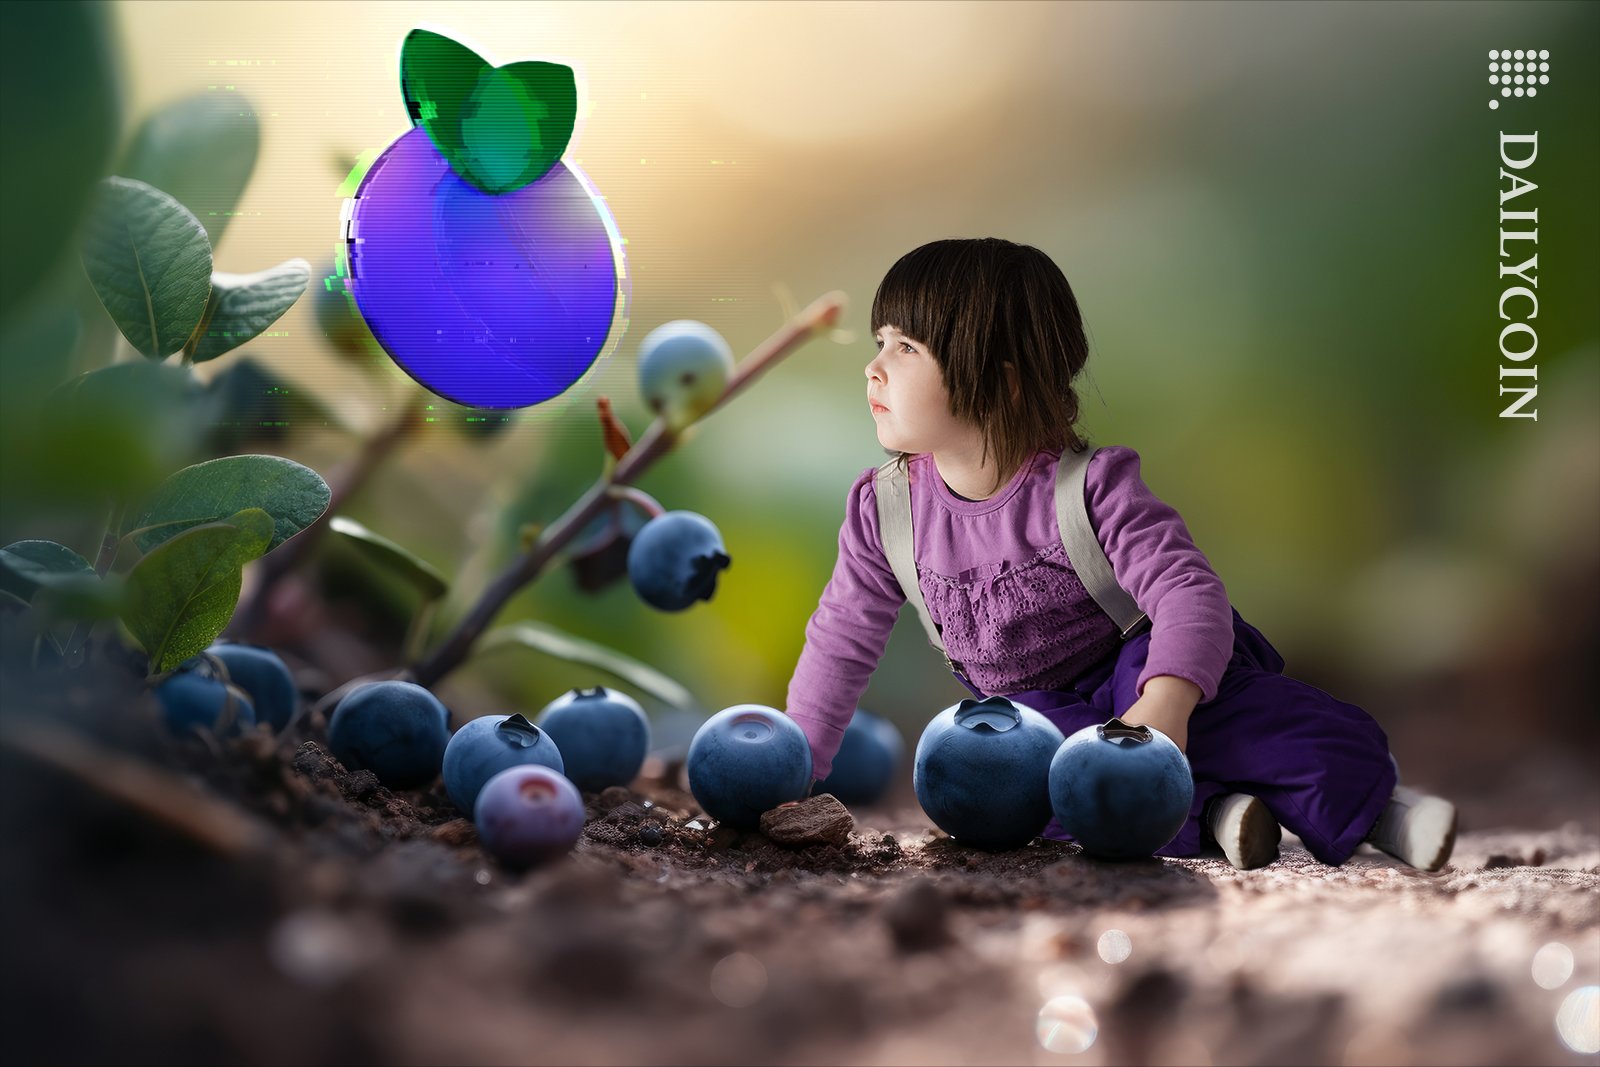 Little girl sitting on a land of blueberries and sees one hovering glitching blueberry.